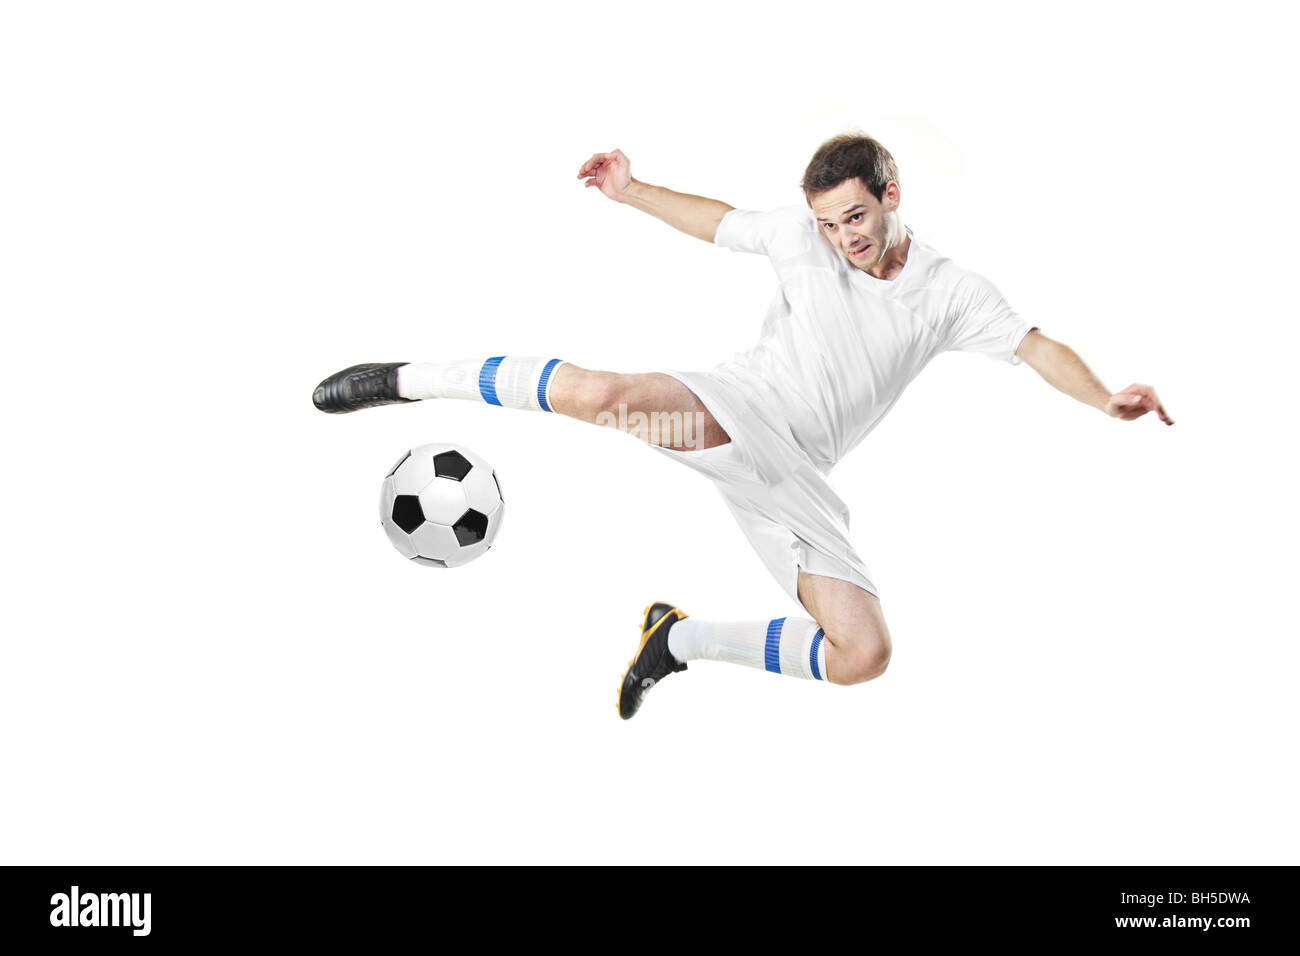 Soccer player kicking a ball  isolated on white background Stock Photo